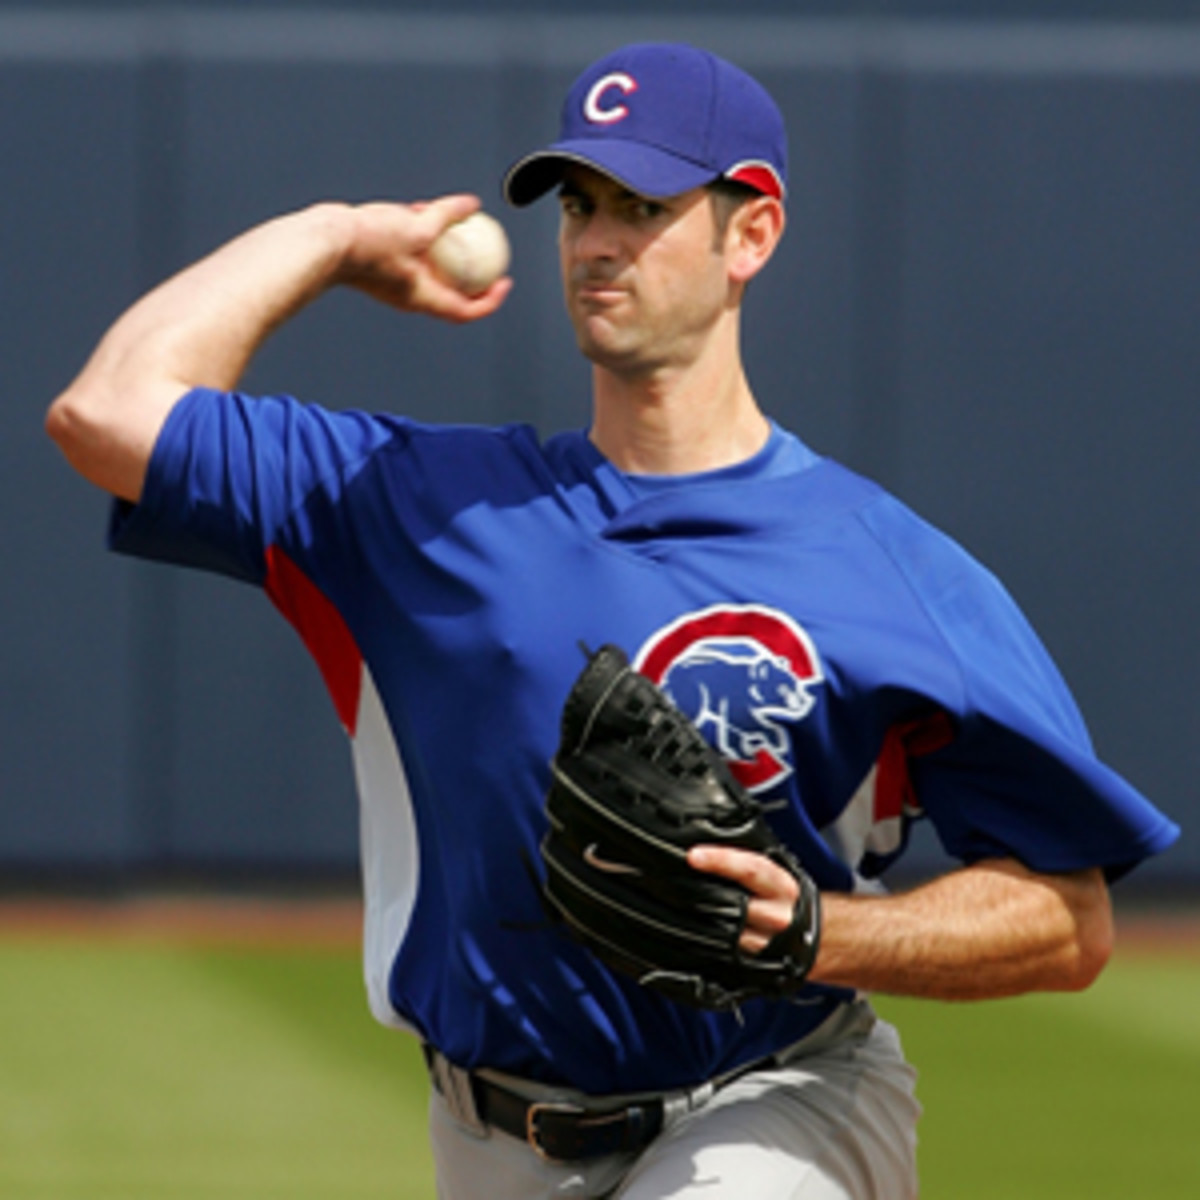 Mark Prior is attempting another comeback with the Reds and manager Dusty Baker. (Stephen Dunn/Getty Images)